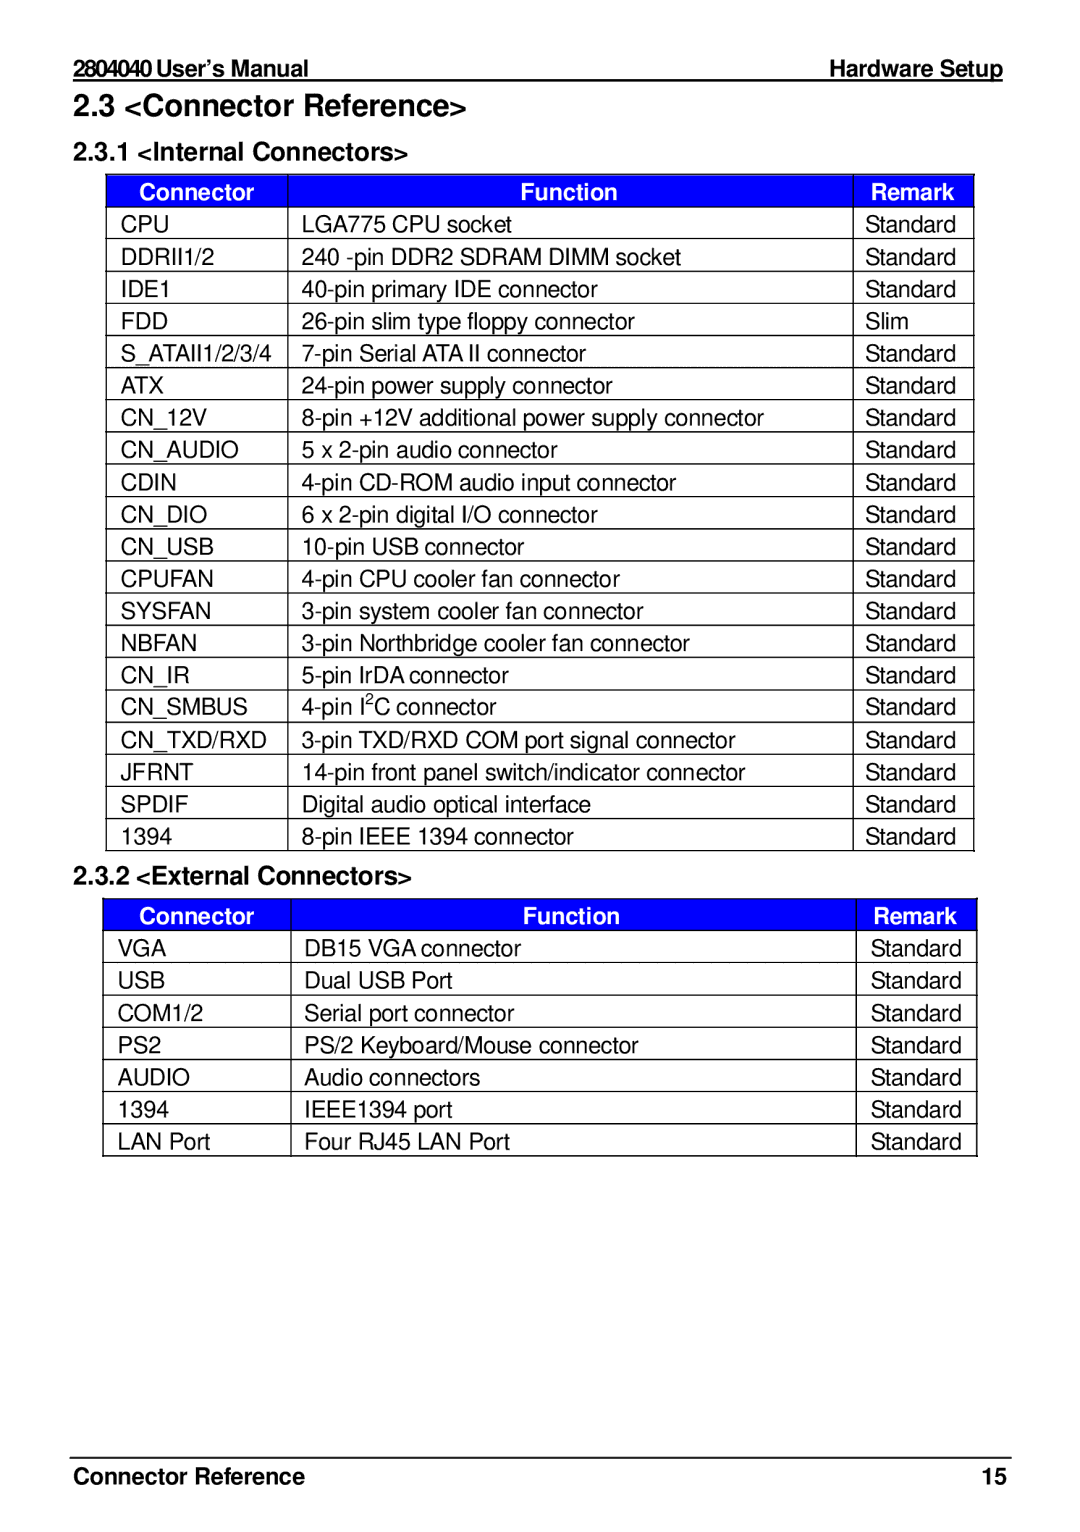 Intel 2804040 user manual Connector Reference, Internal Connectors, External Connectors, Connector Function 